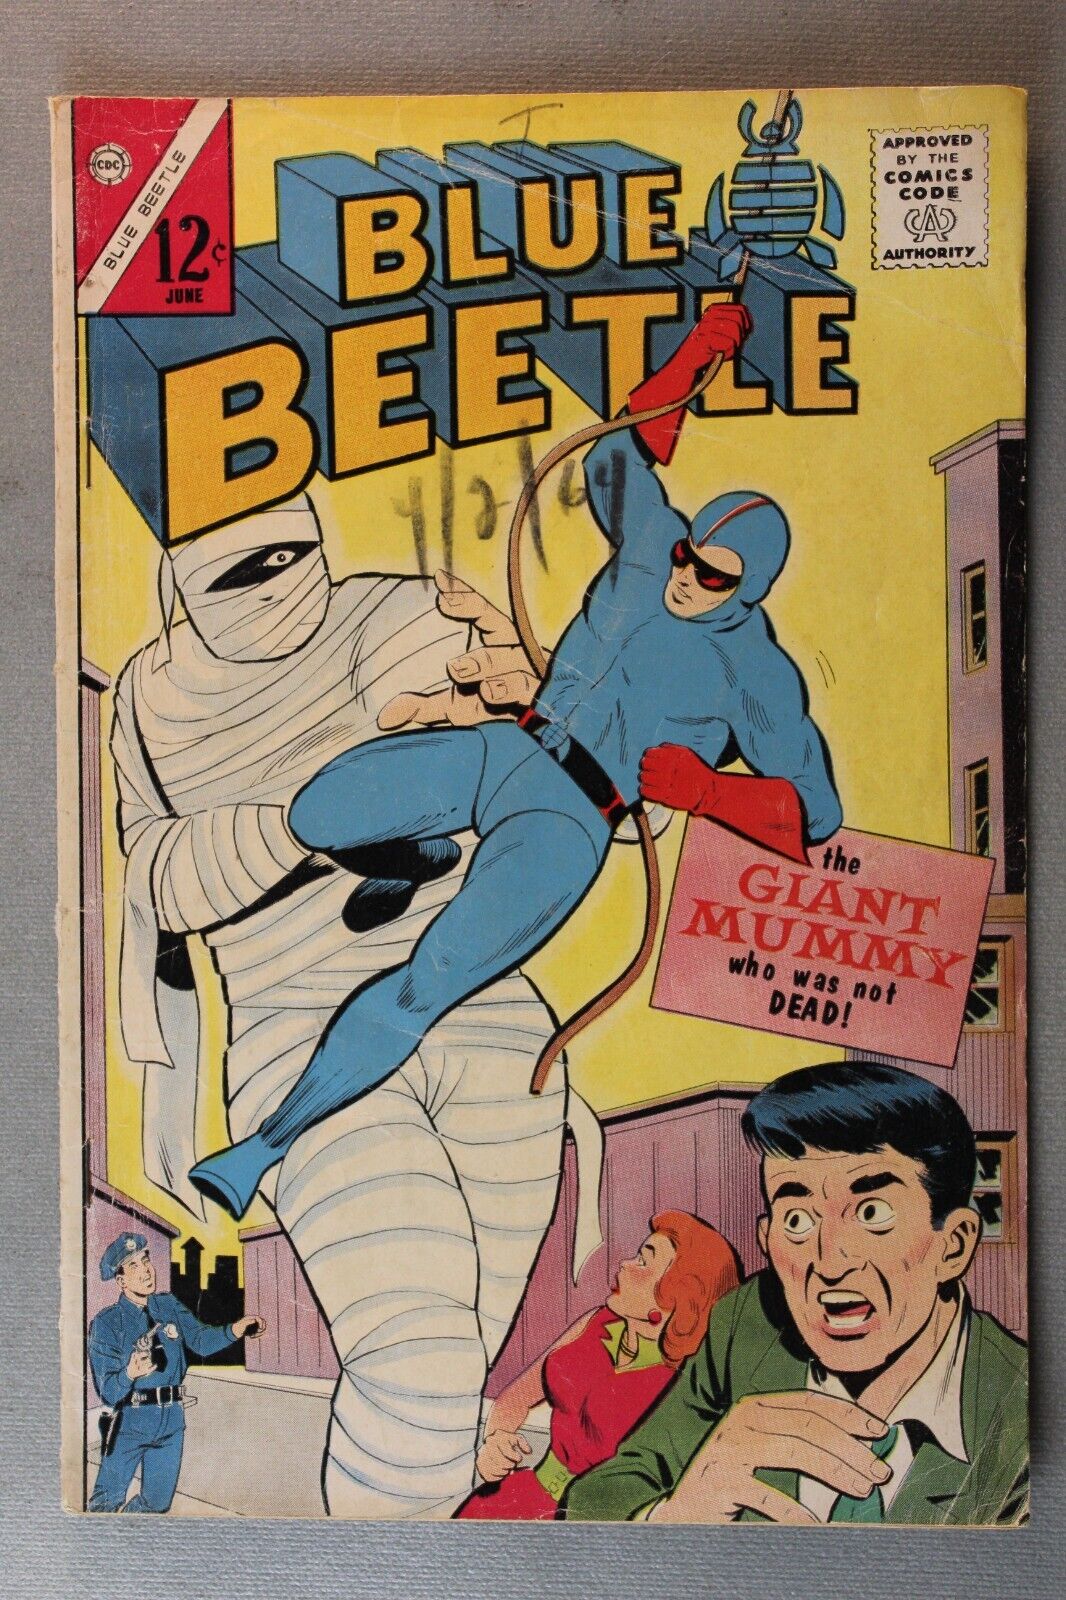 BLUE BEETLE #1 *1964* ~ 1st Silver Age Appearance of The Blue Beetle ~ 3.0 ~